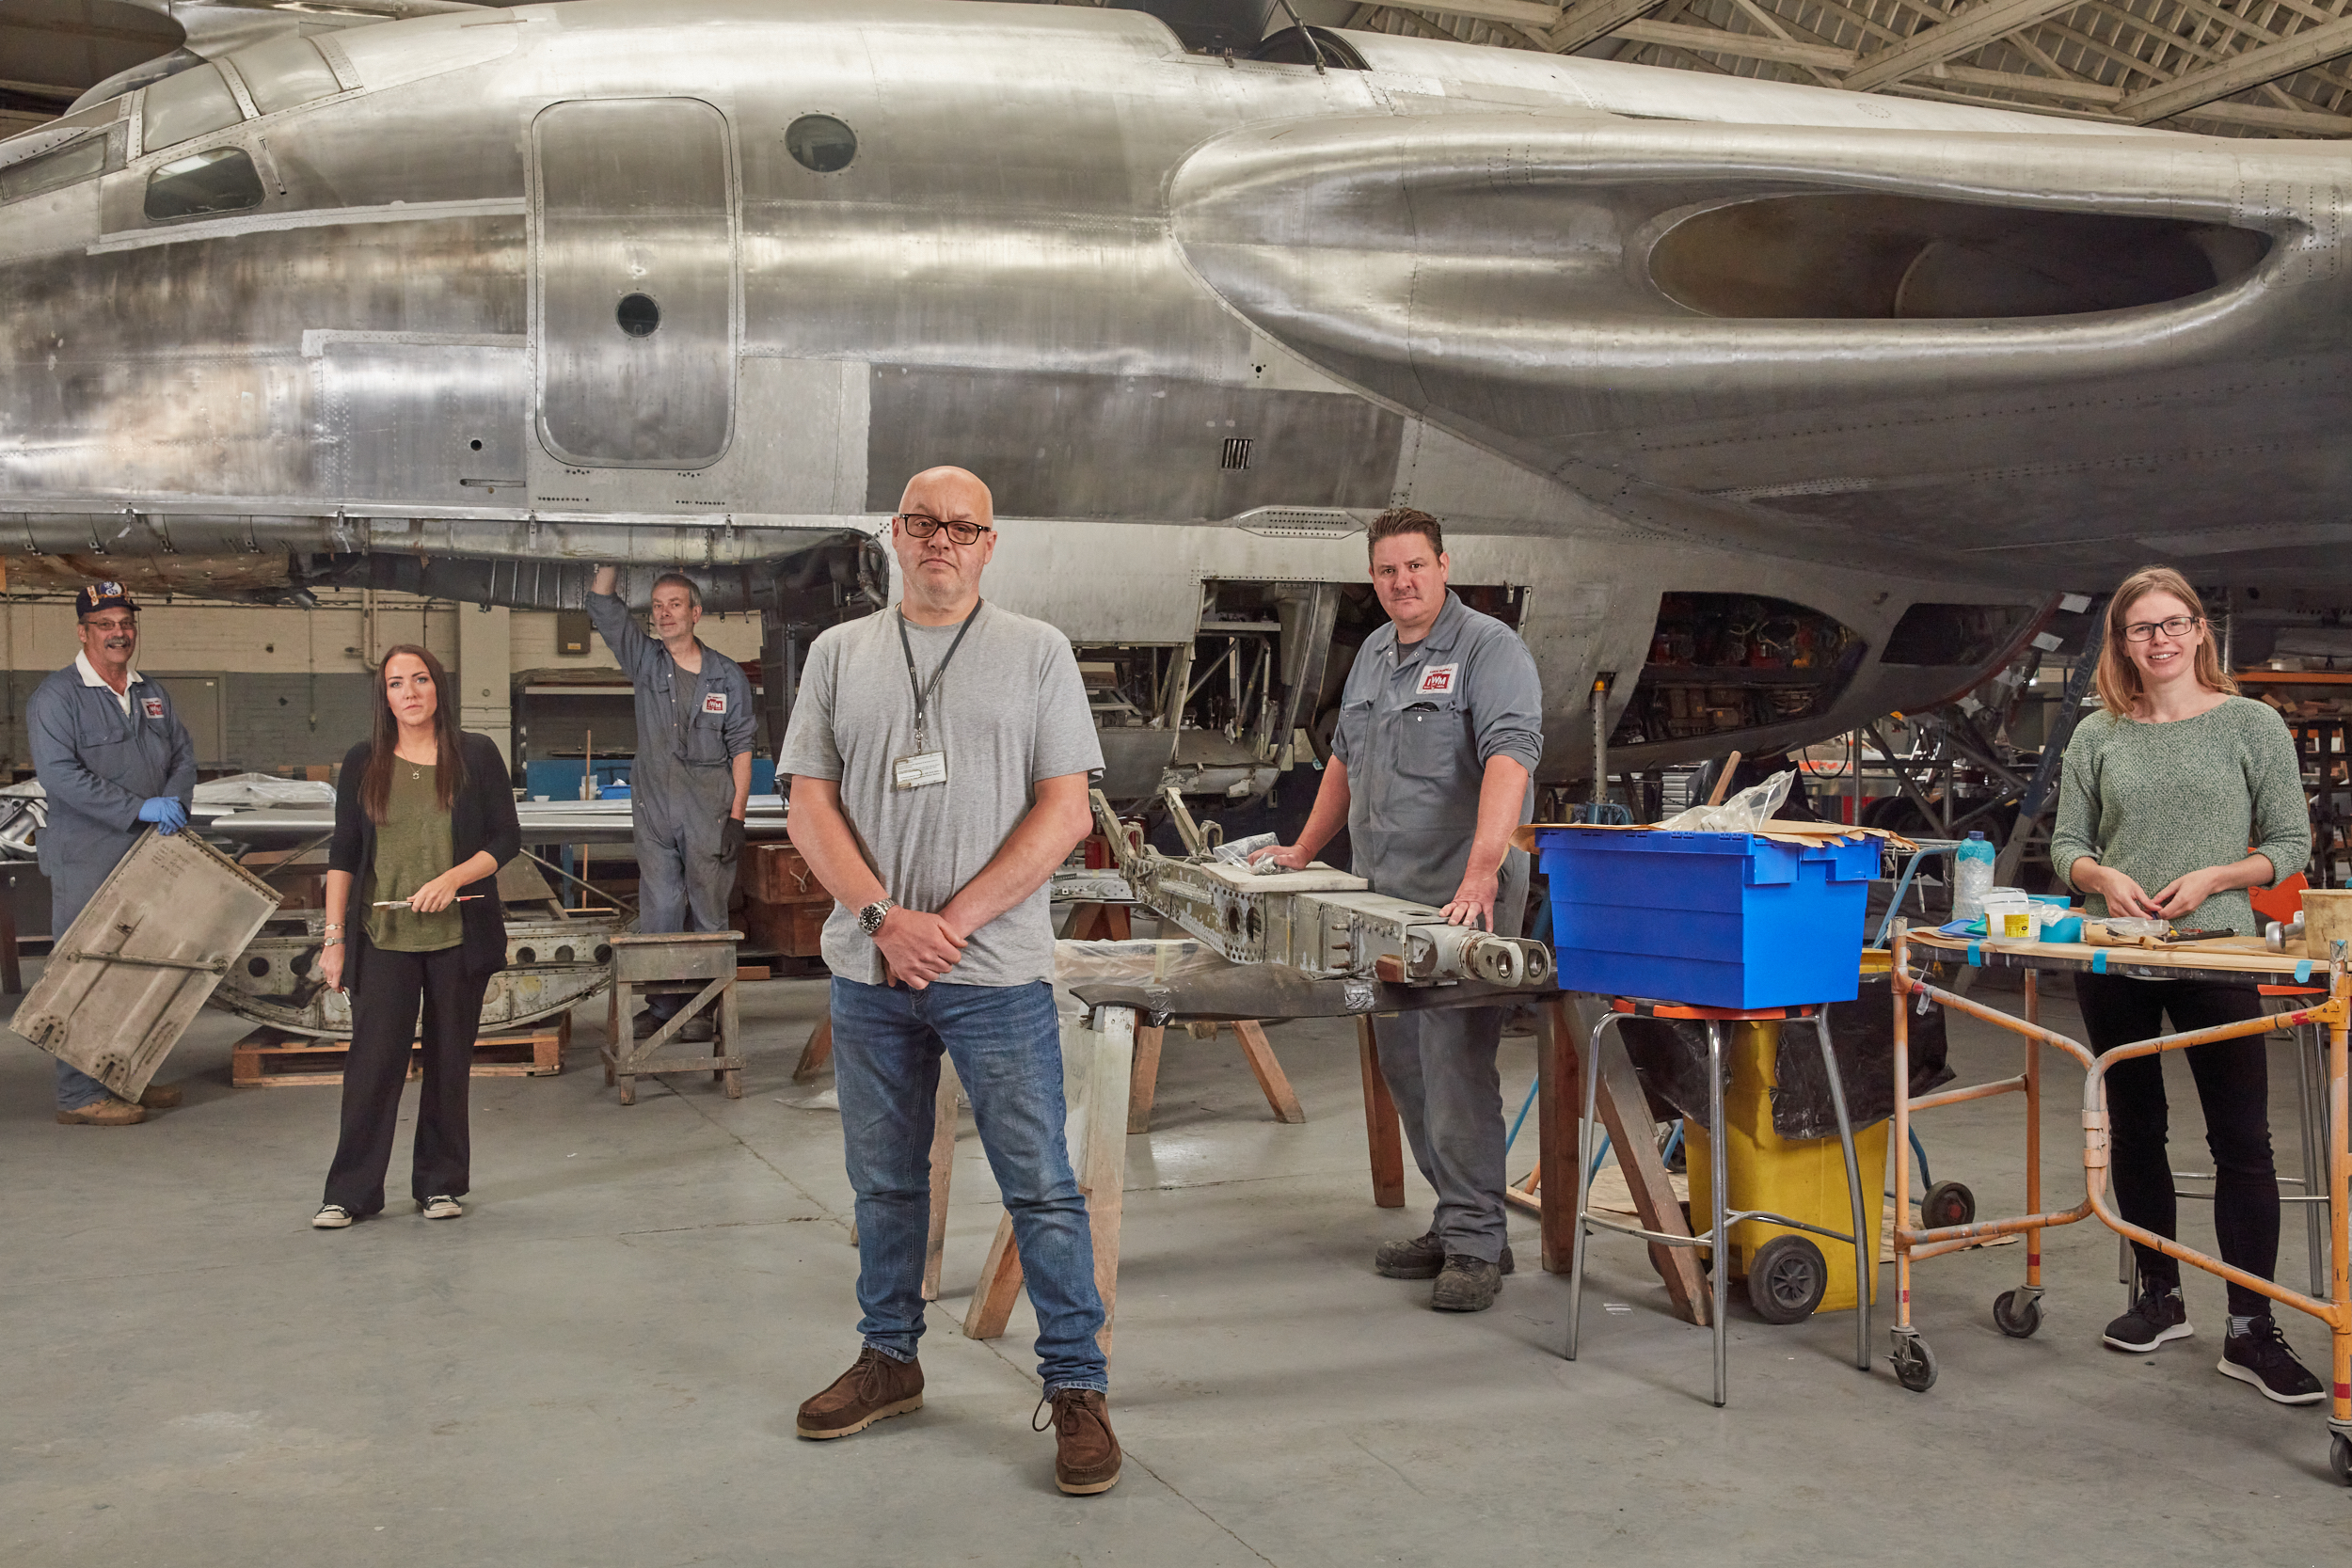 Portrait of the conservation team at IWM Duxford, UK. Six members of the team are pictured in an aircraft hanger in front of a silver aeroplane that they’ve been working on.